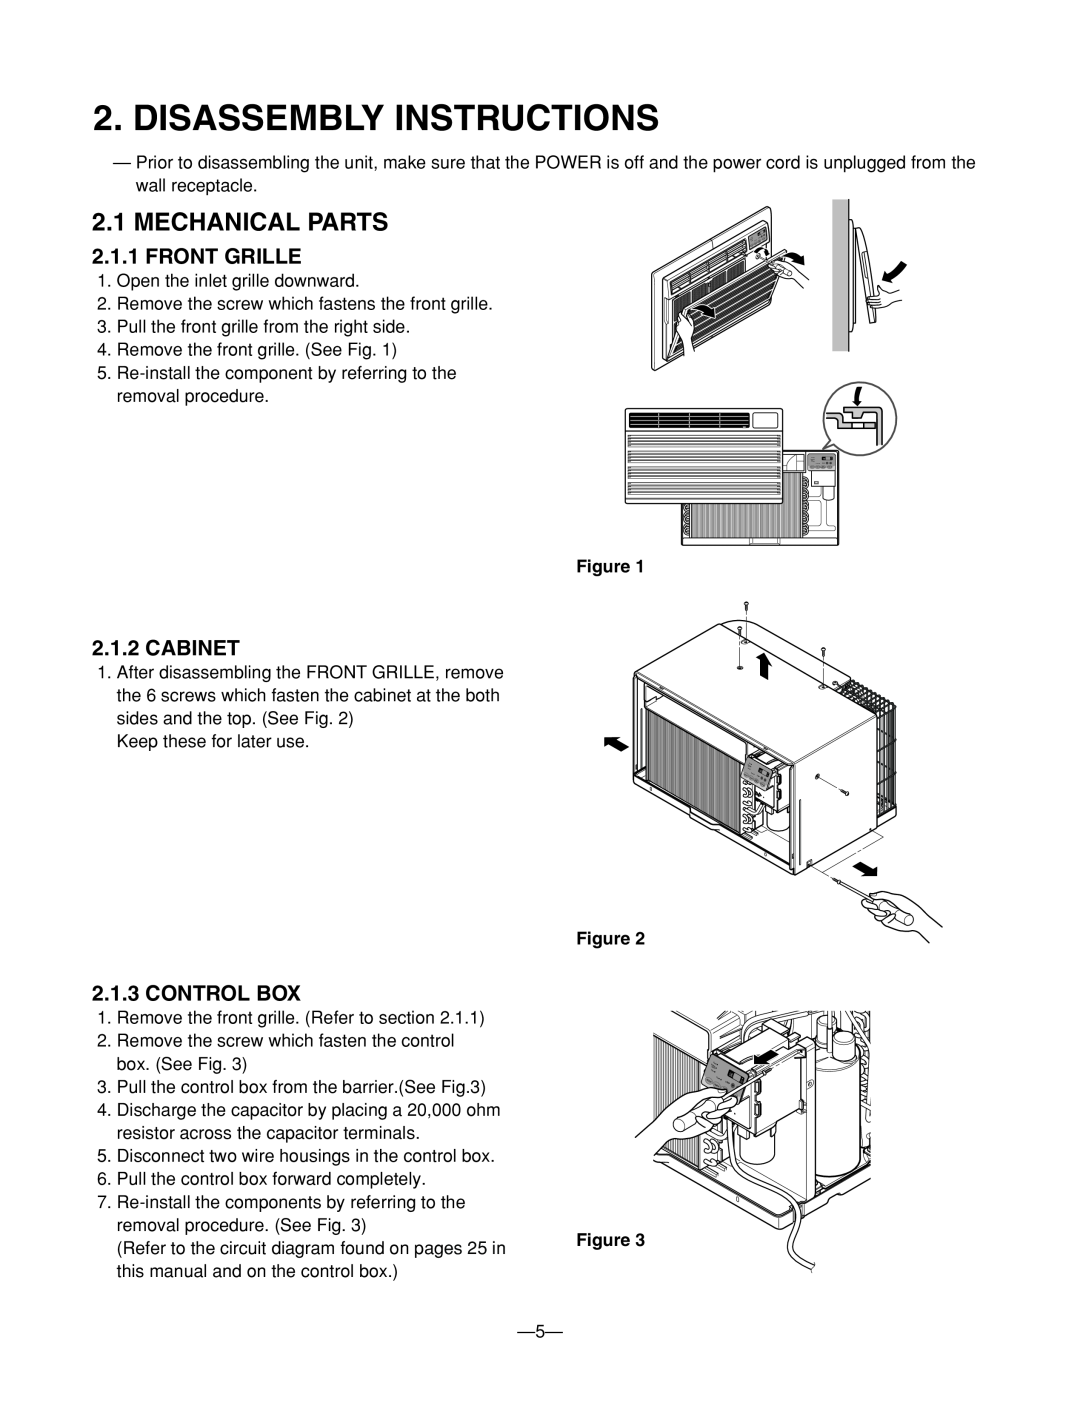 Heat Controller BG-103A service manual Disassembly Instructions, Mechanical Parts, Front Grille, Cabinet, Control Box 